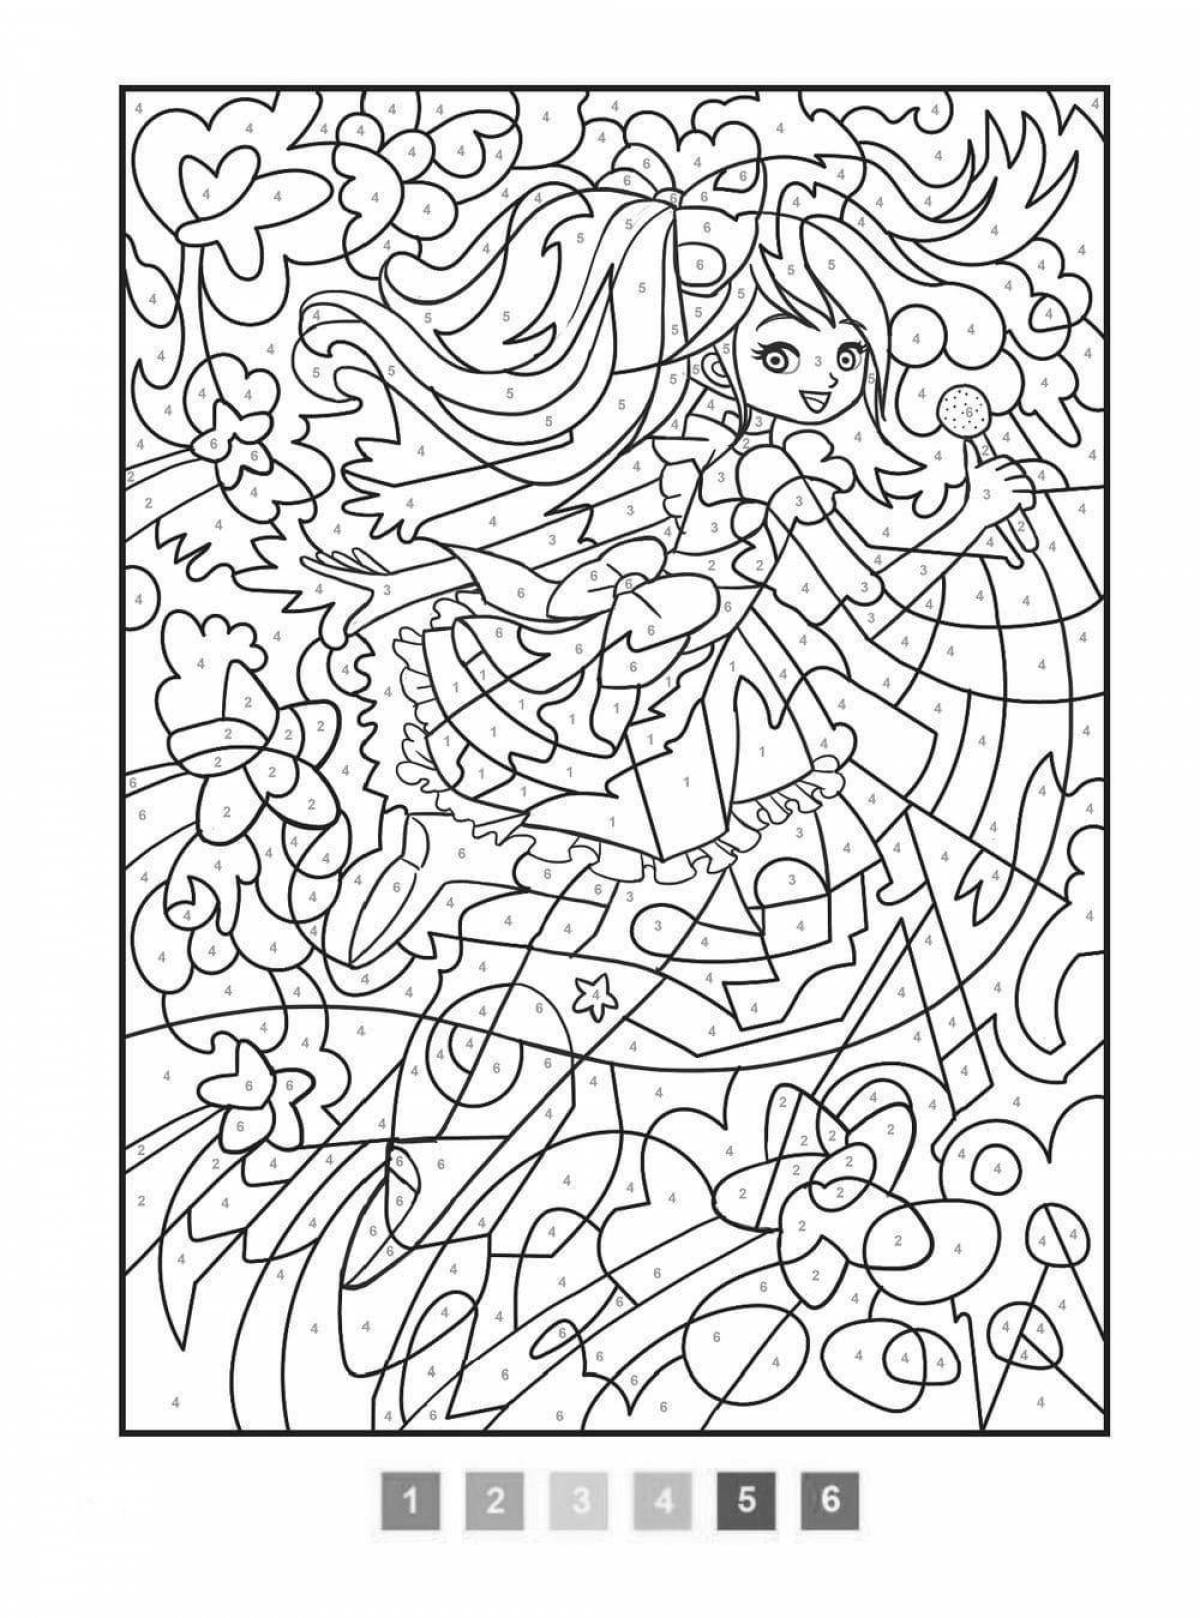 Difficult coloring game color by number